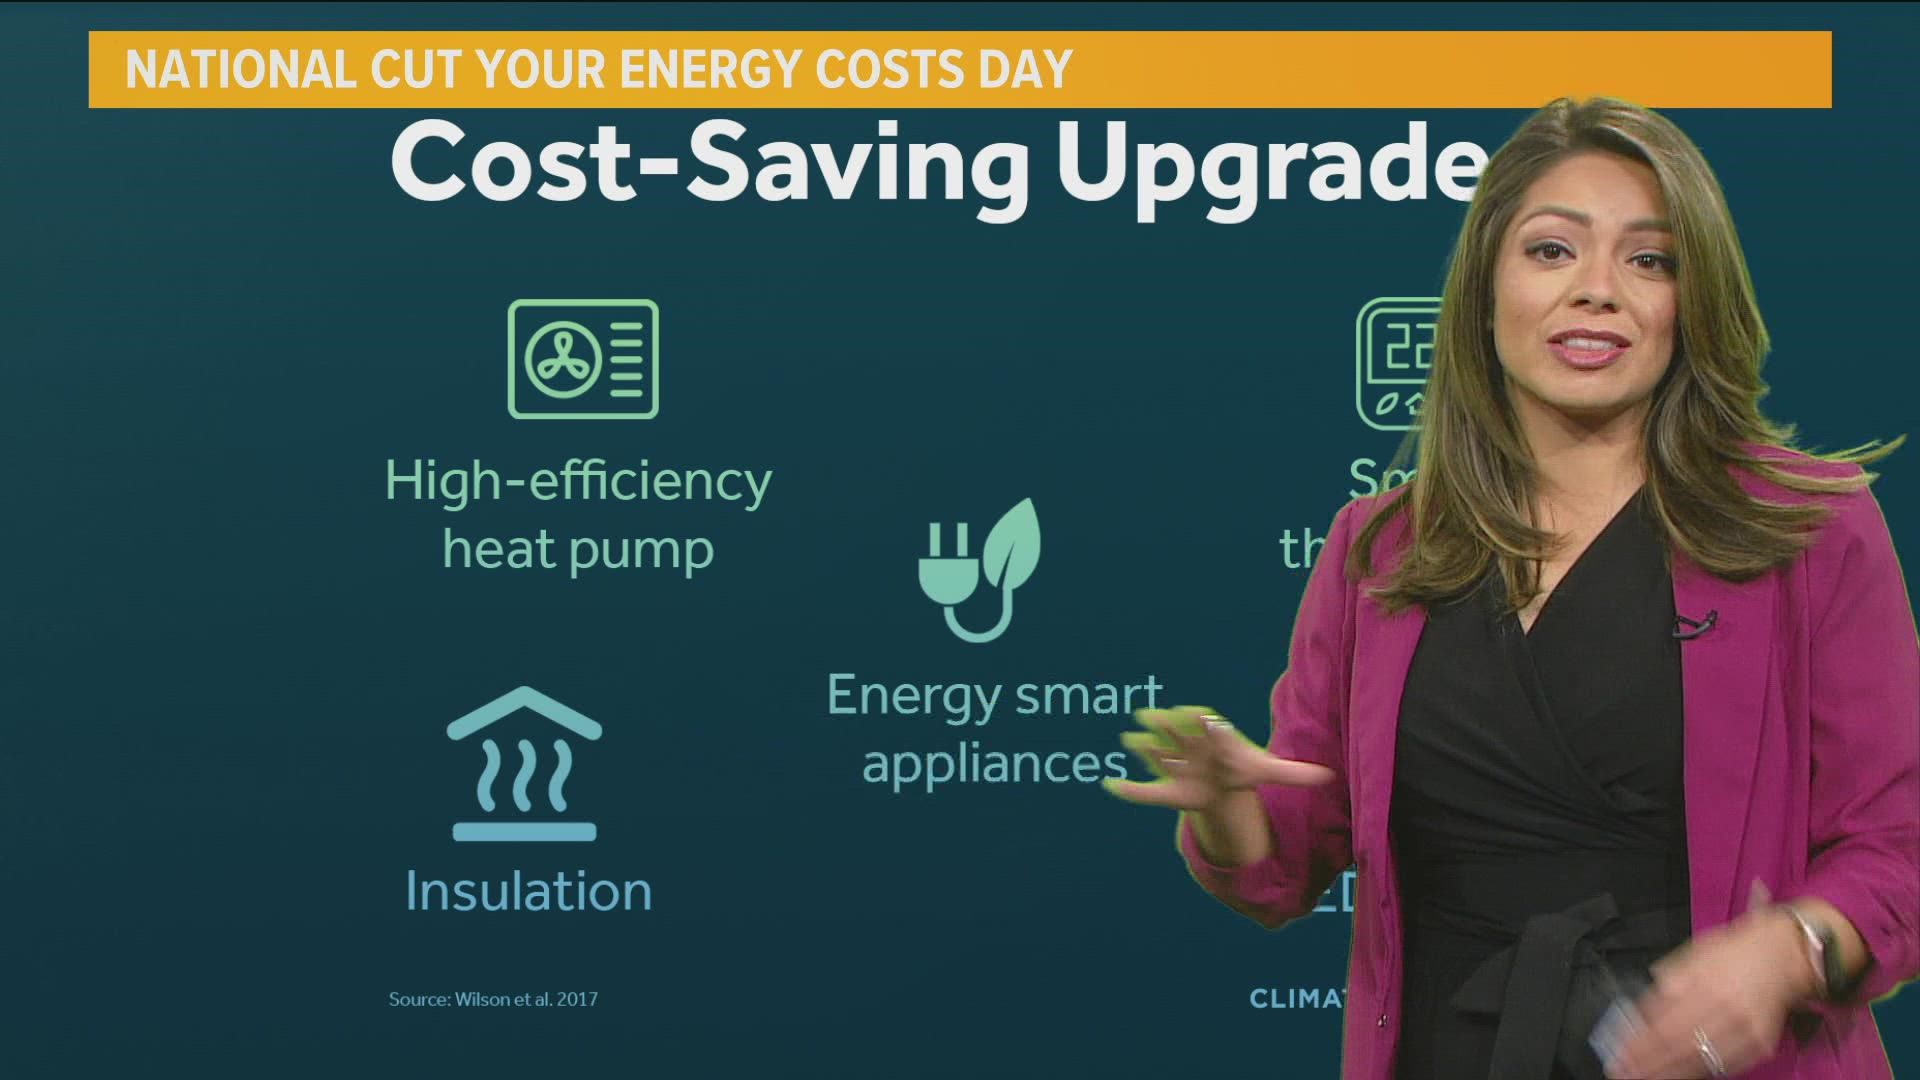 Cut your energy costs with these climate-friendly tips